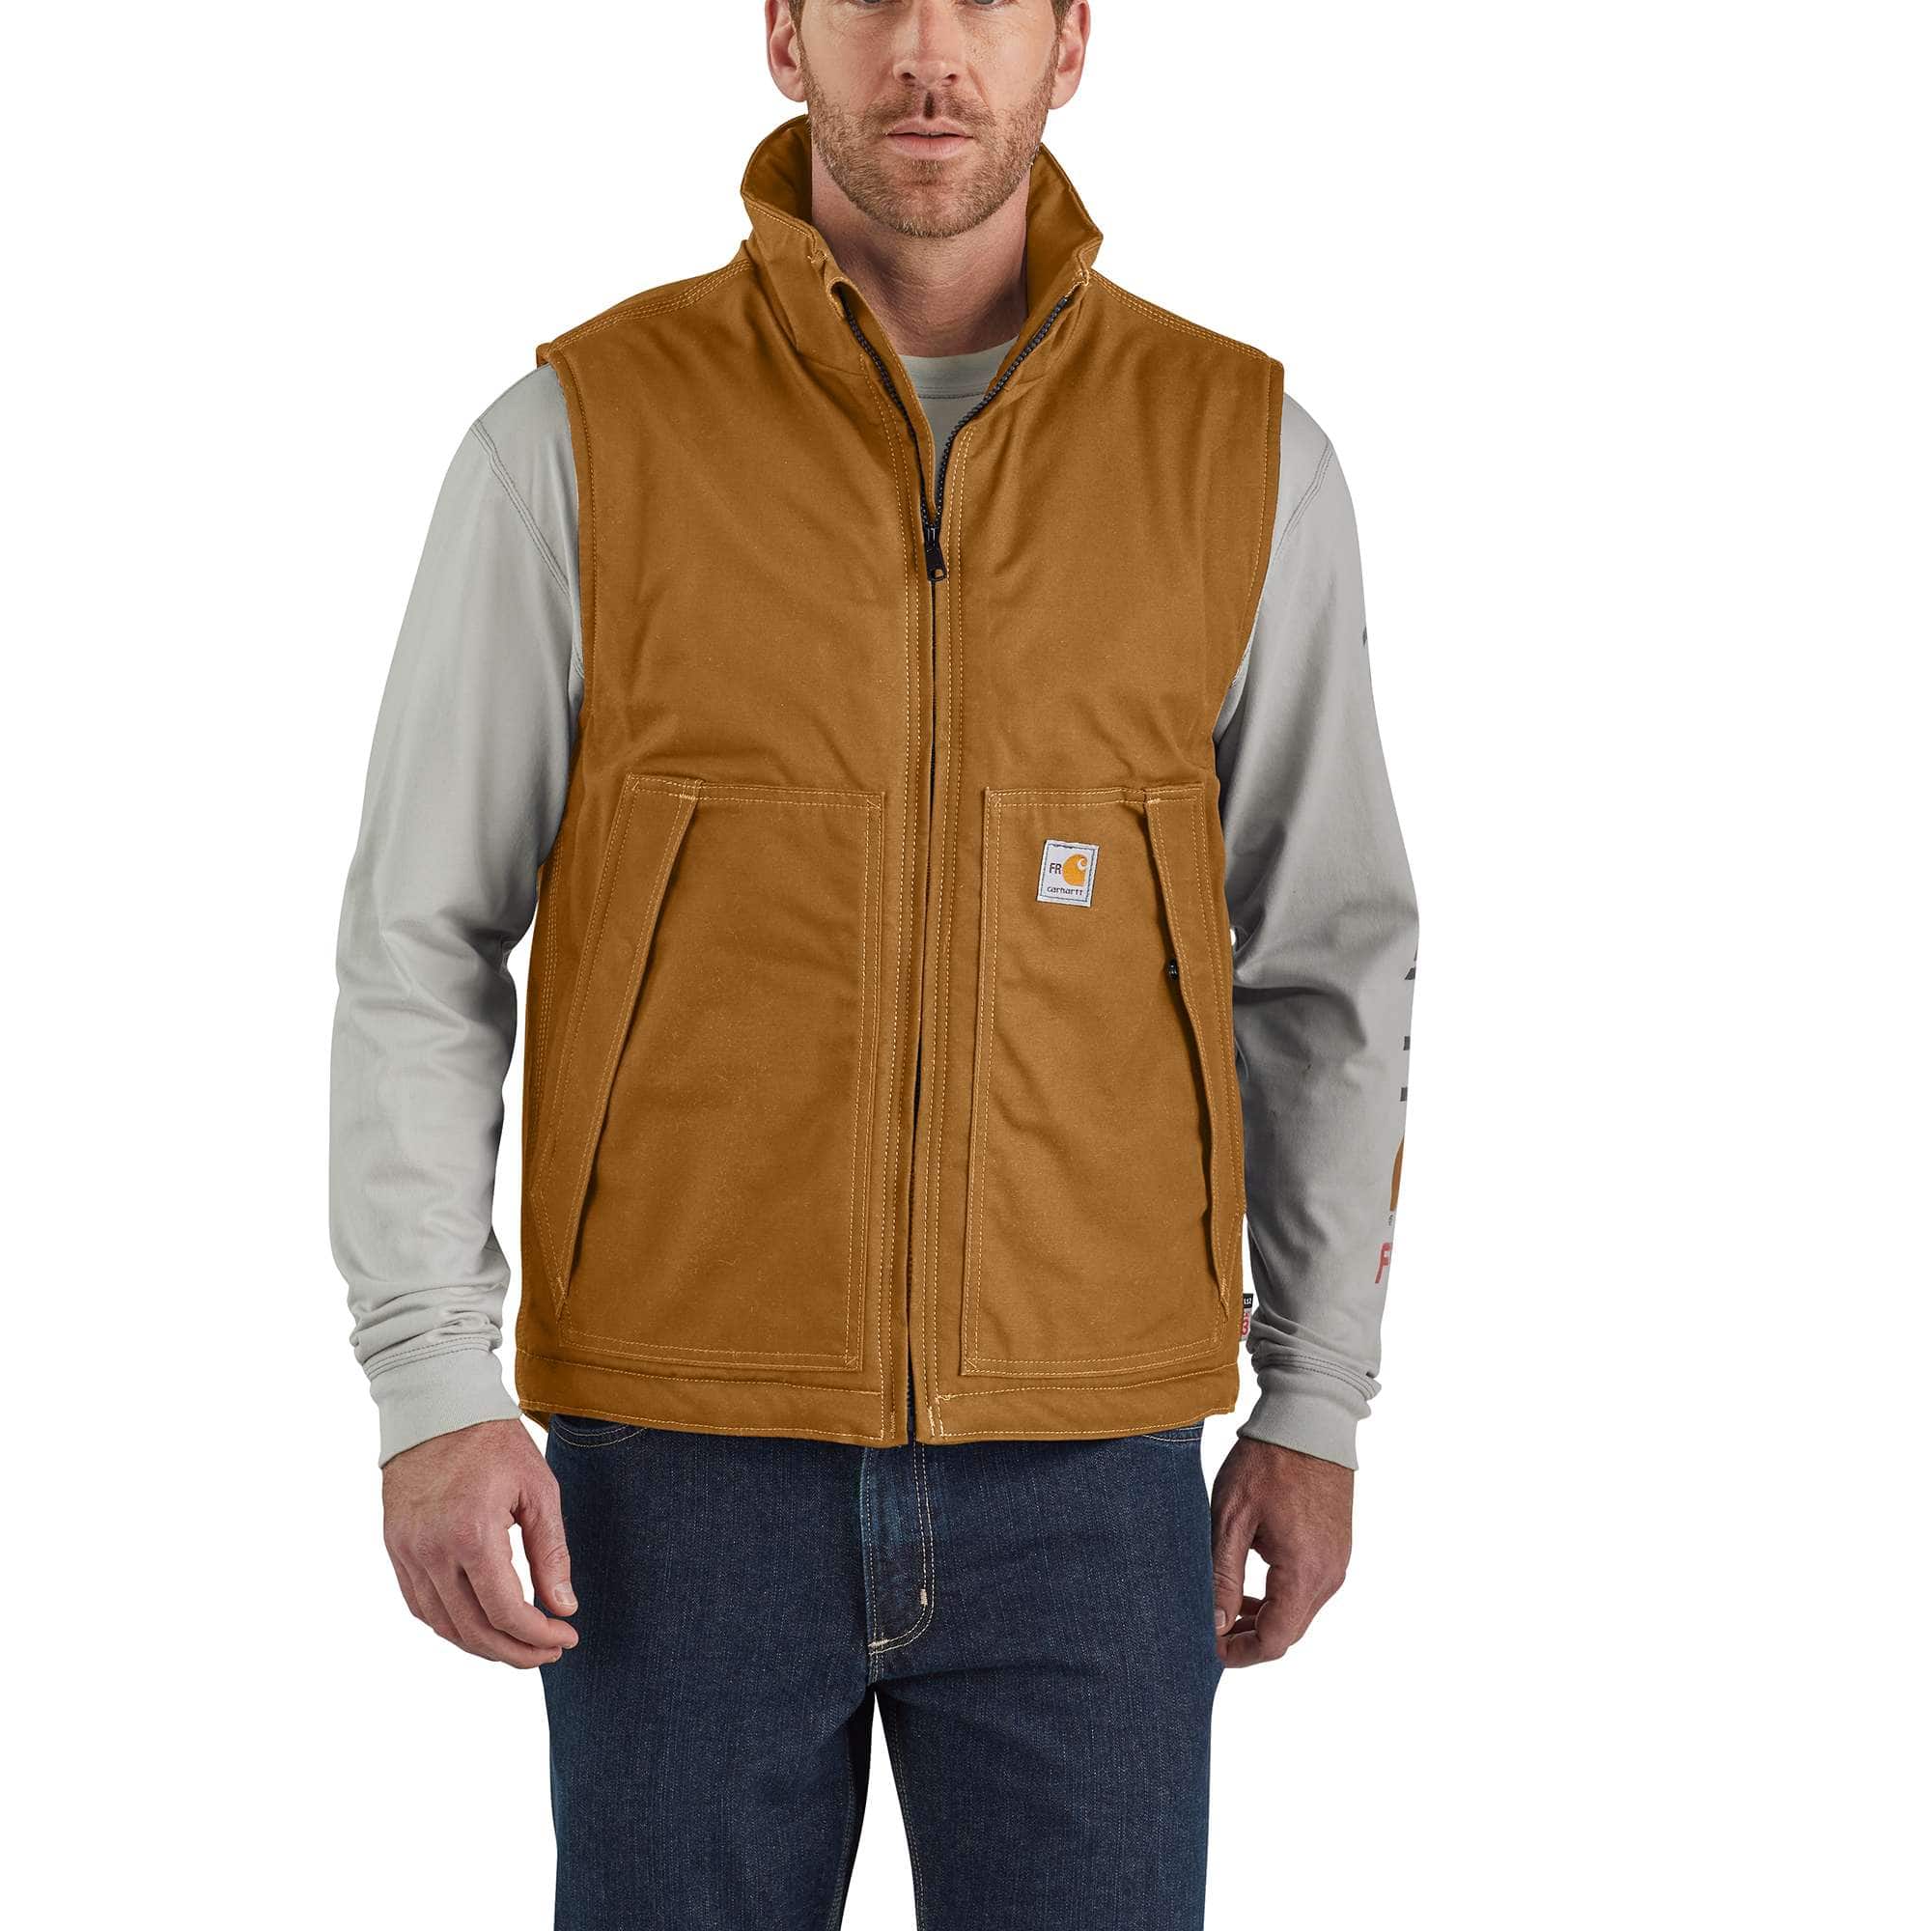 Clearance & Sale Items: Work Clothing, Accessories, & Gear | Carhartt